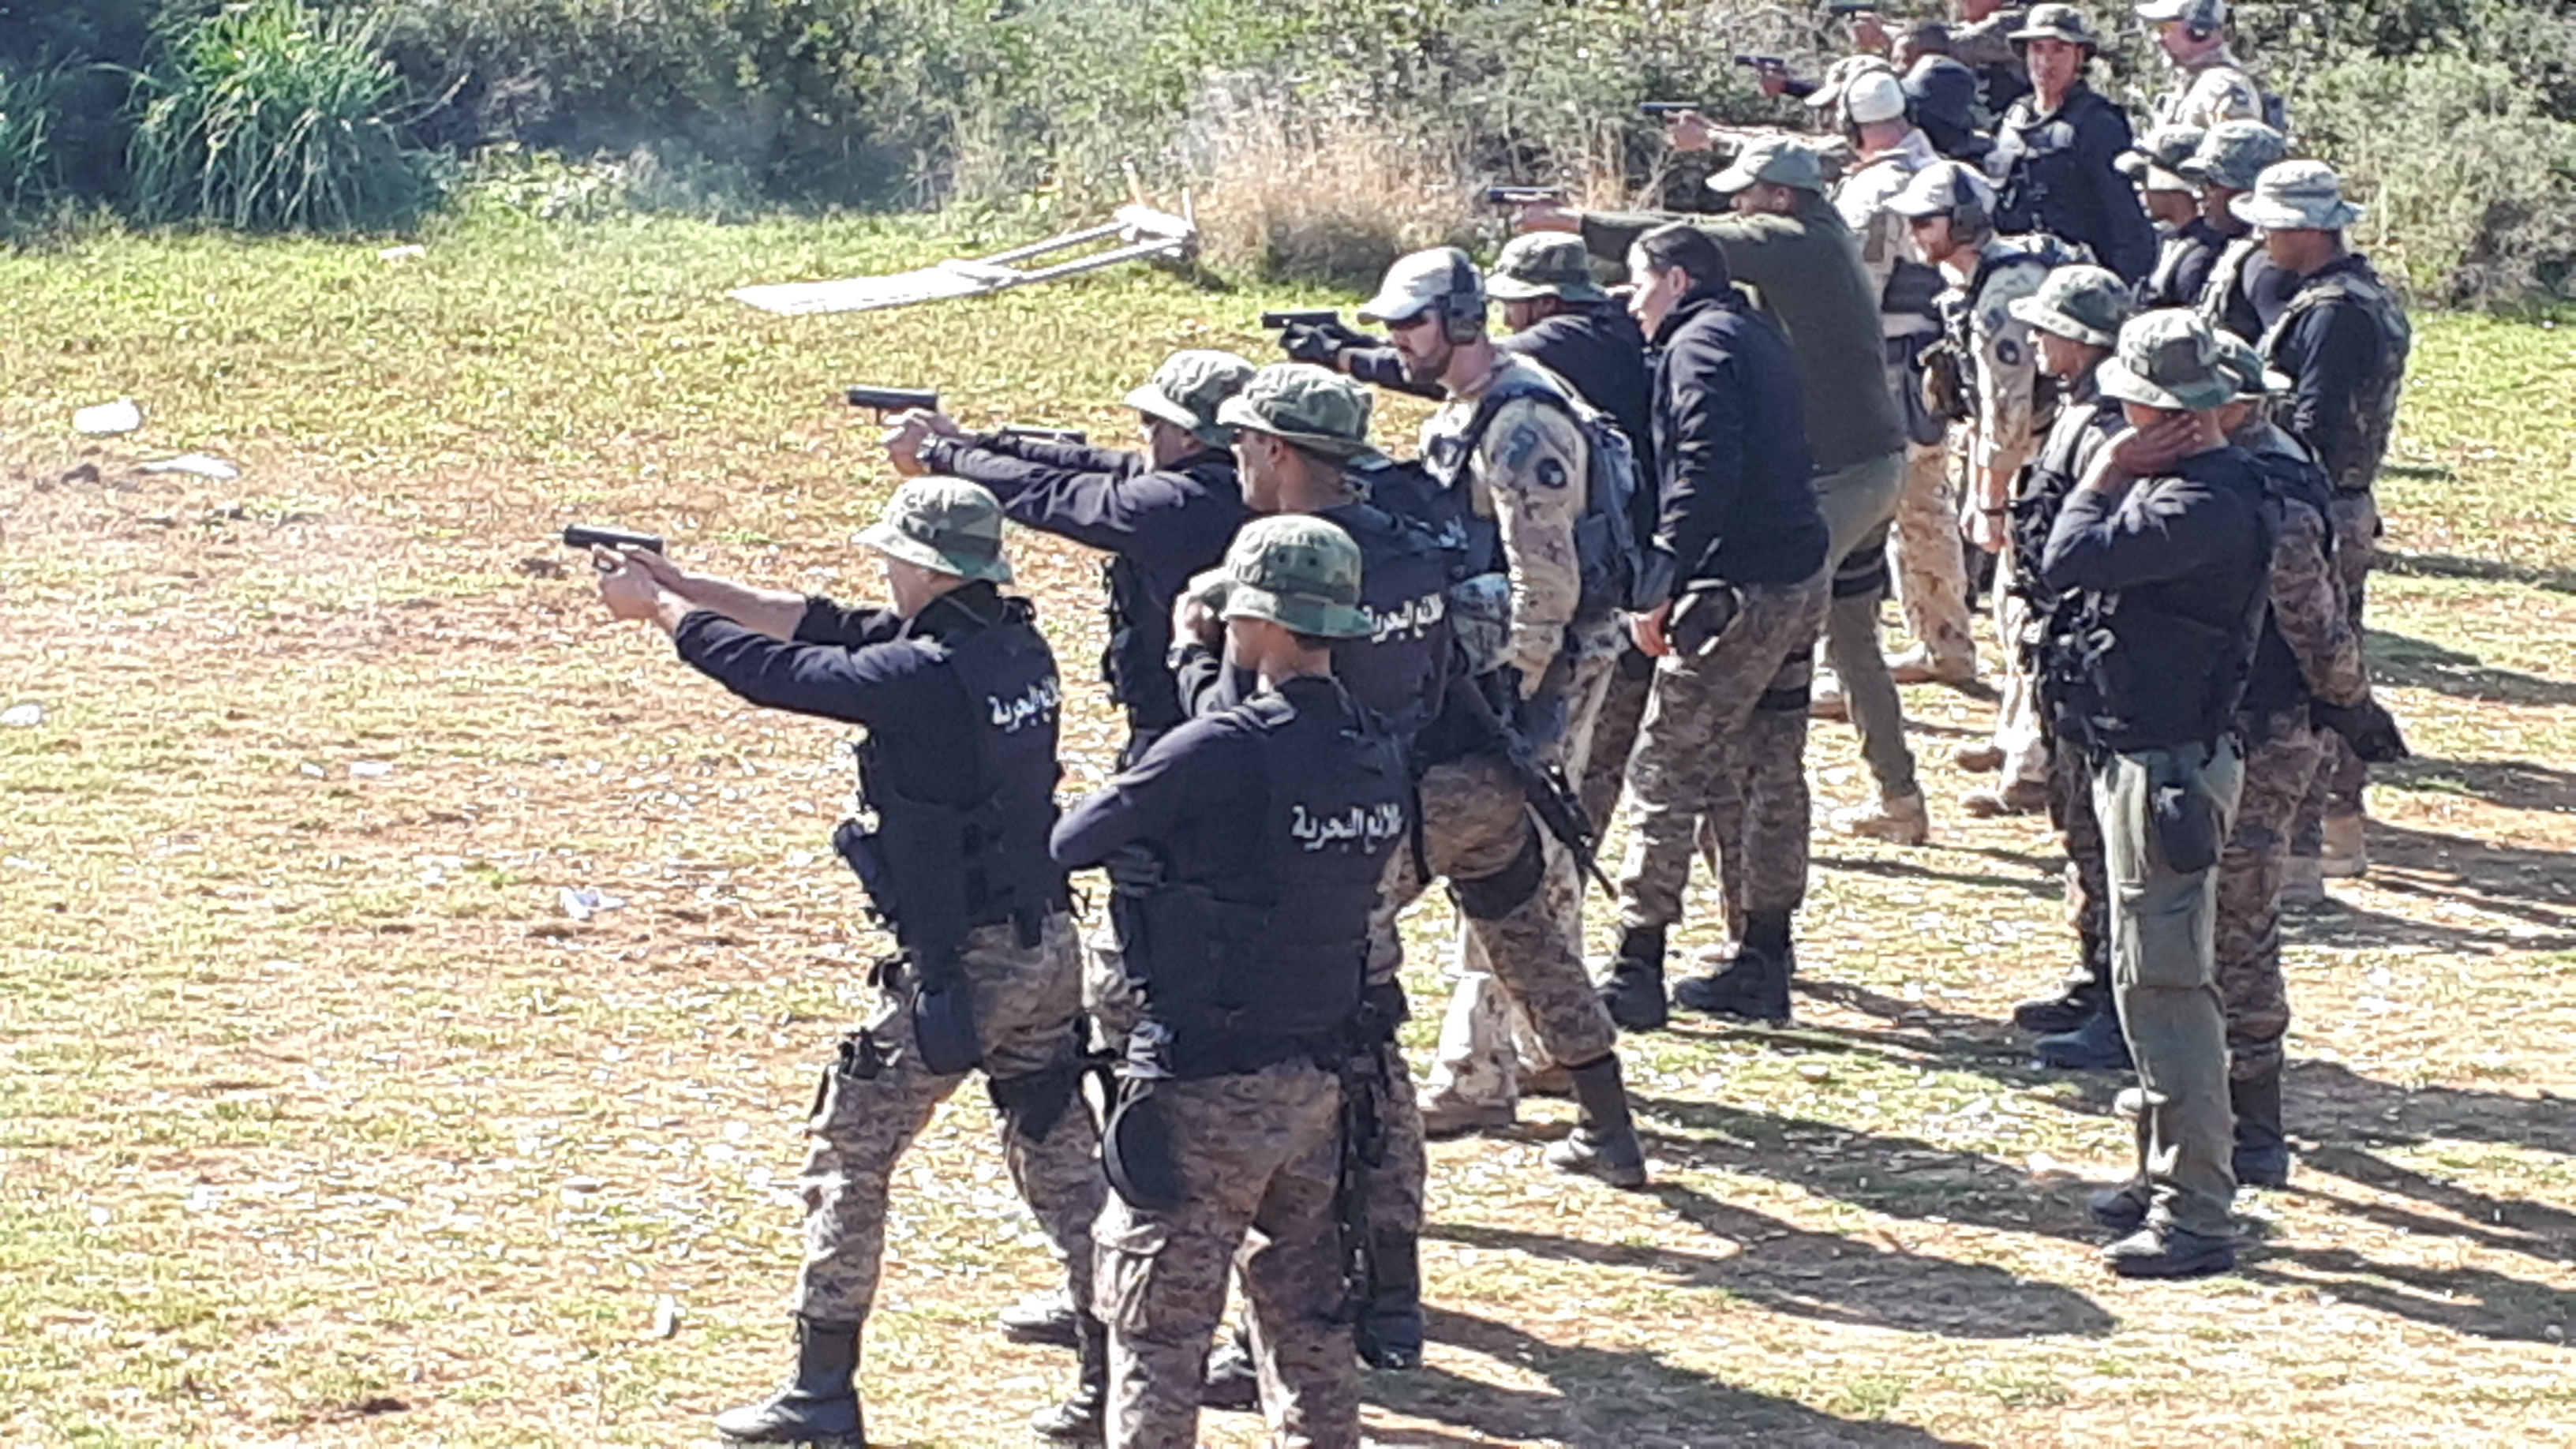 Military members fire weapons on a range.